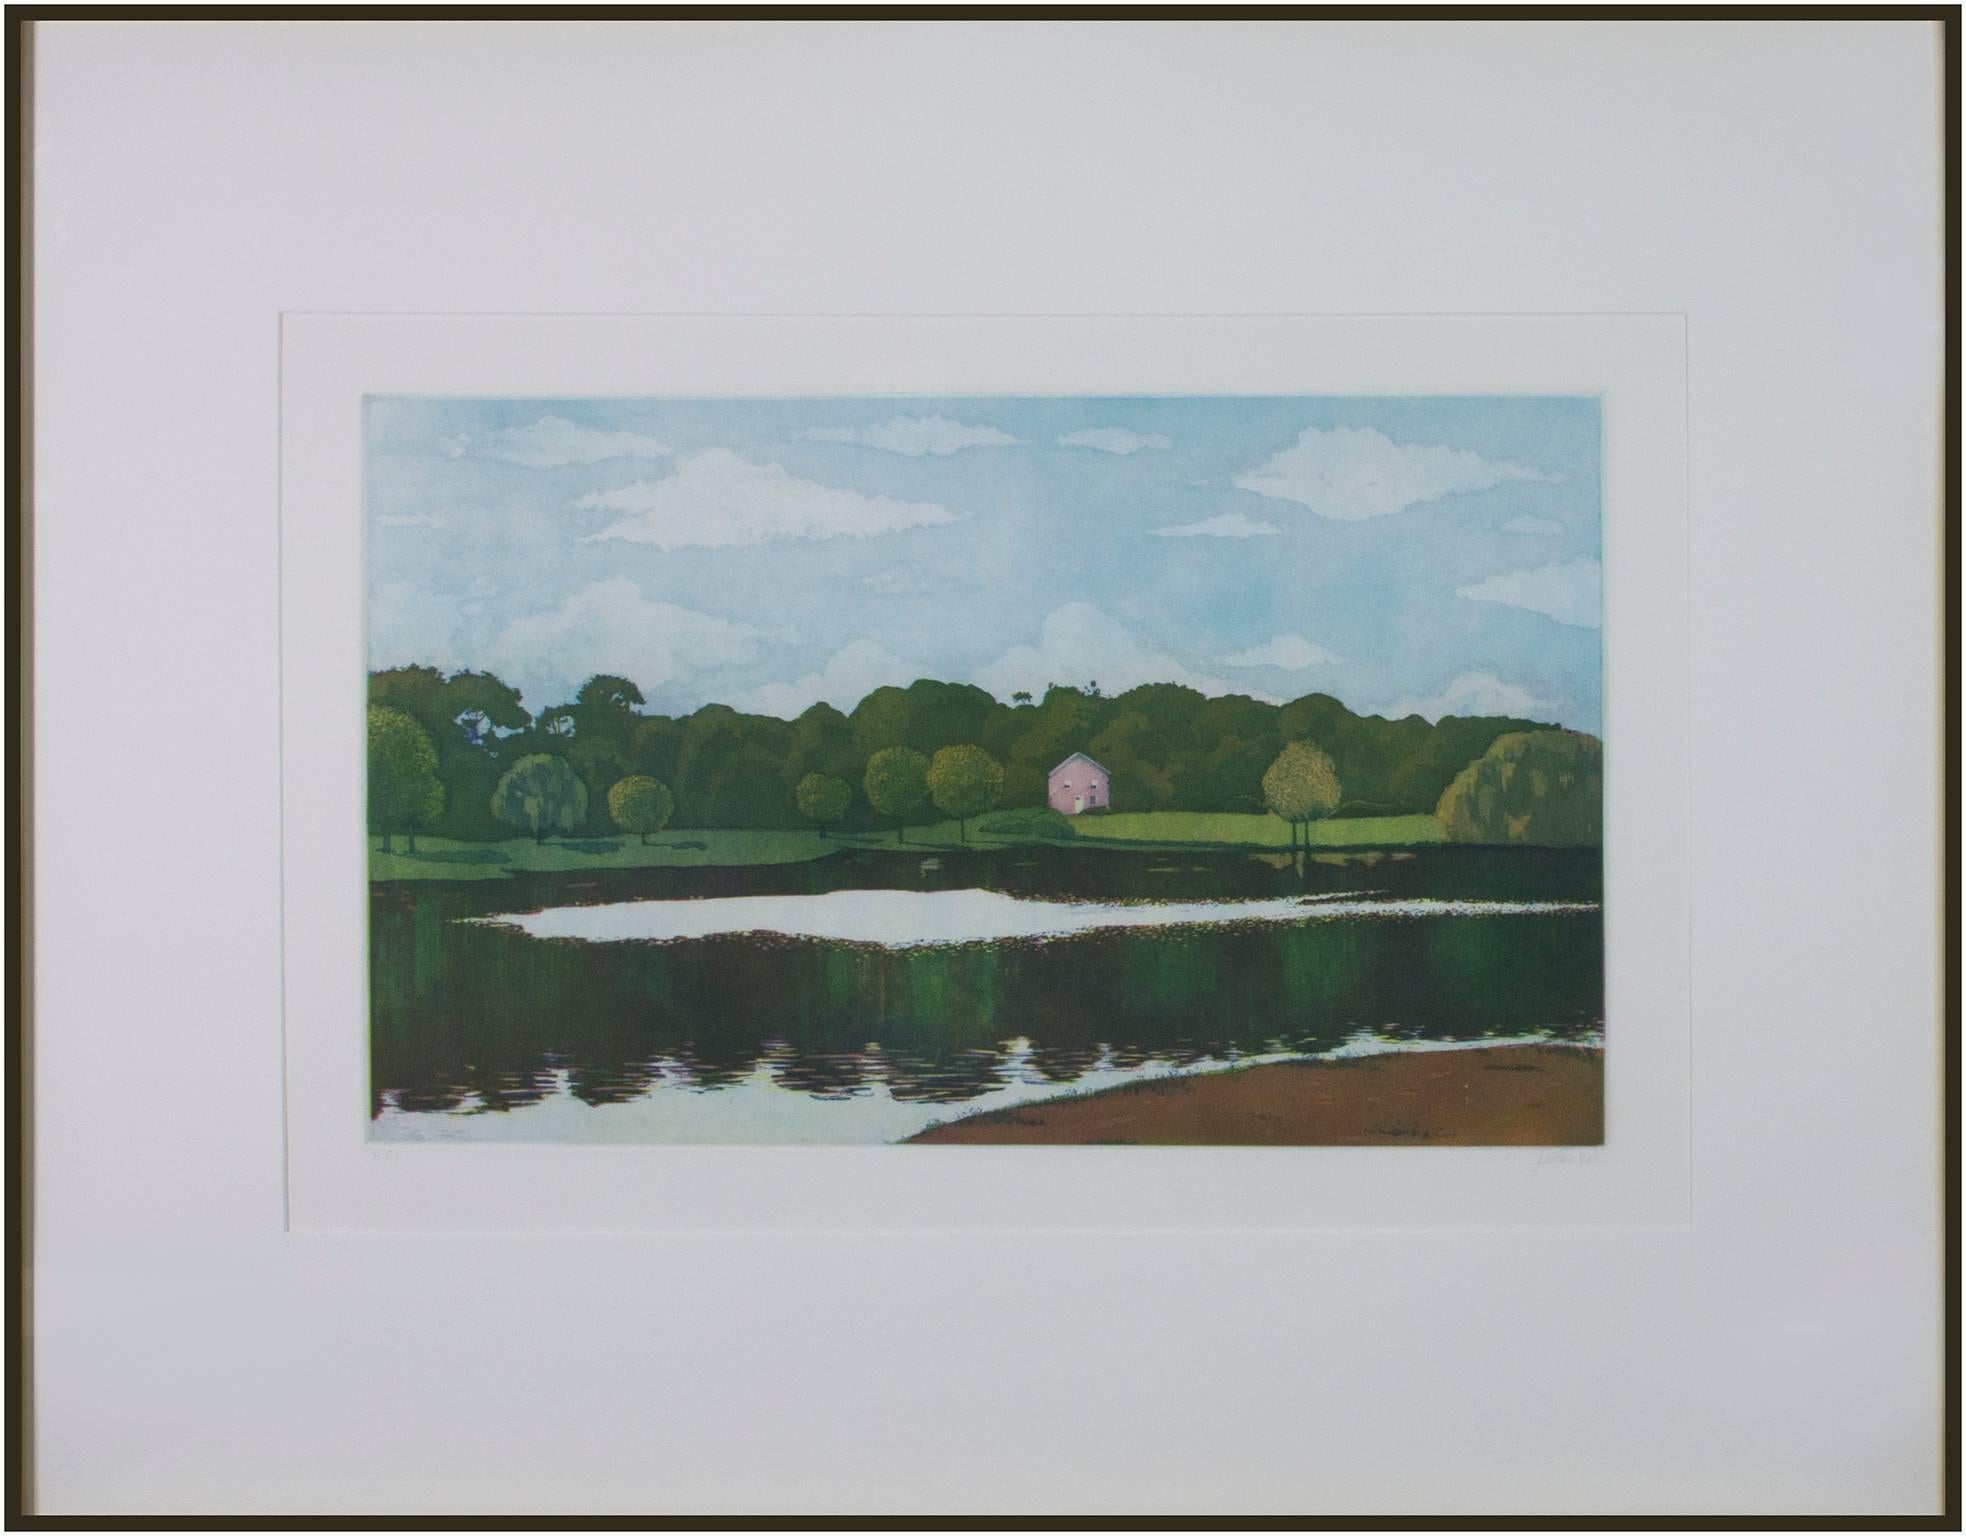 'Untitled (Pink House with Lake)' original aquatint by Nicolette Jelen 1